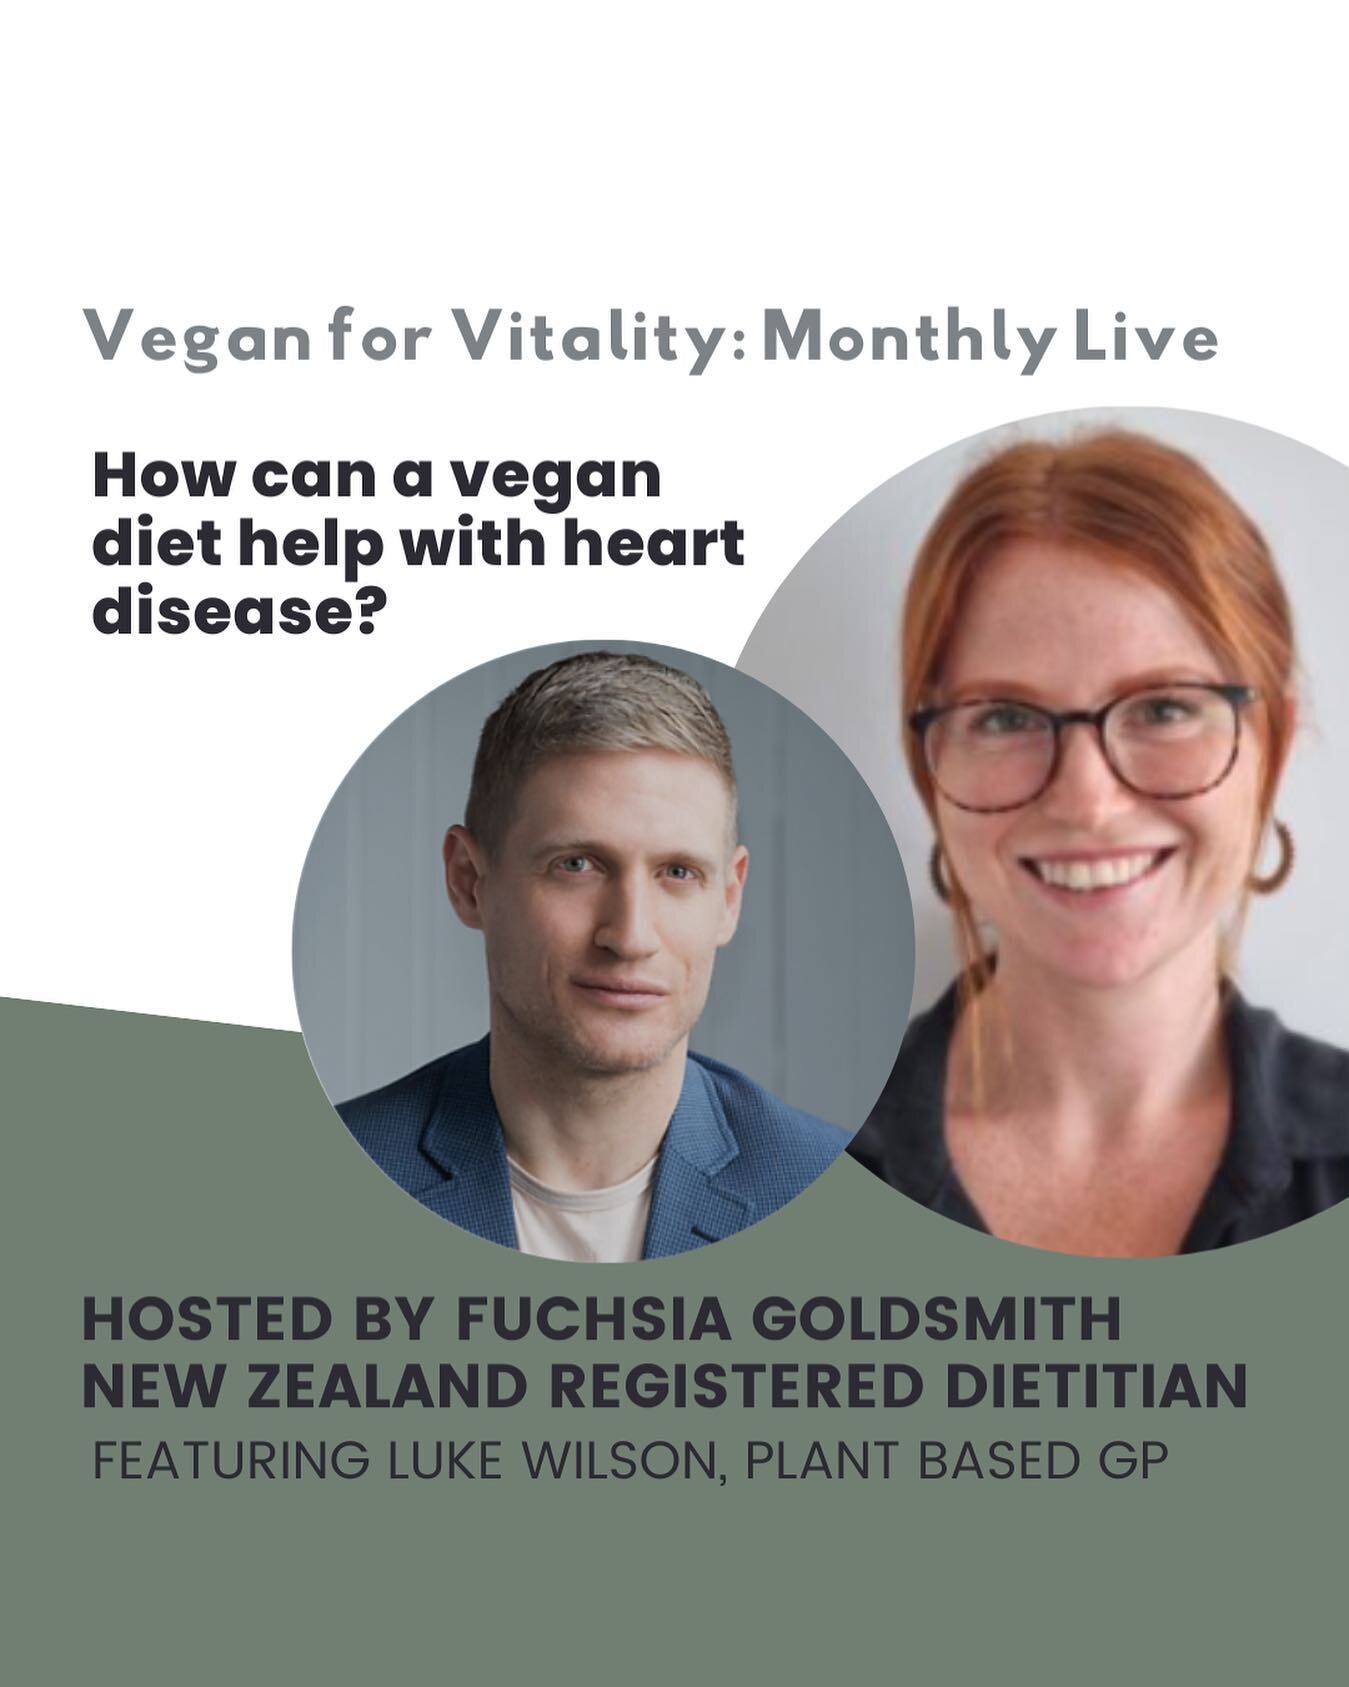 📺 J O I N  U S  L I V E 📺

This Sunday at 2pm, Dr Luke Wilson &amp; myself will be going live to talk about how a vegan diet can help with heart disease ❤️

Sign up for notifications here!